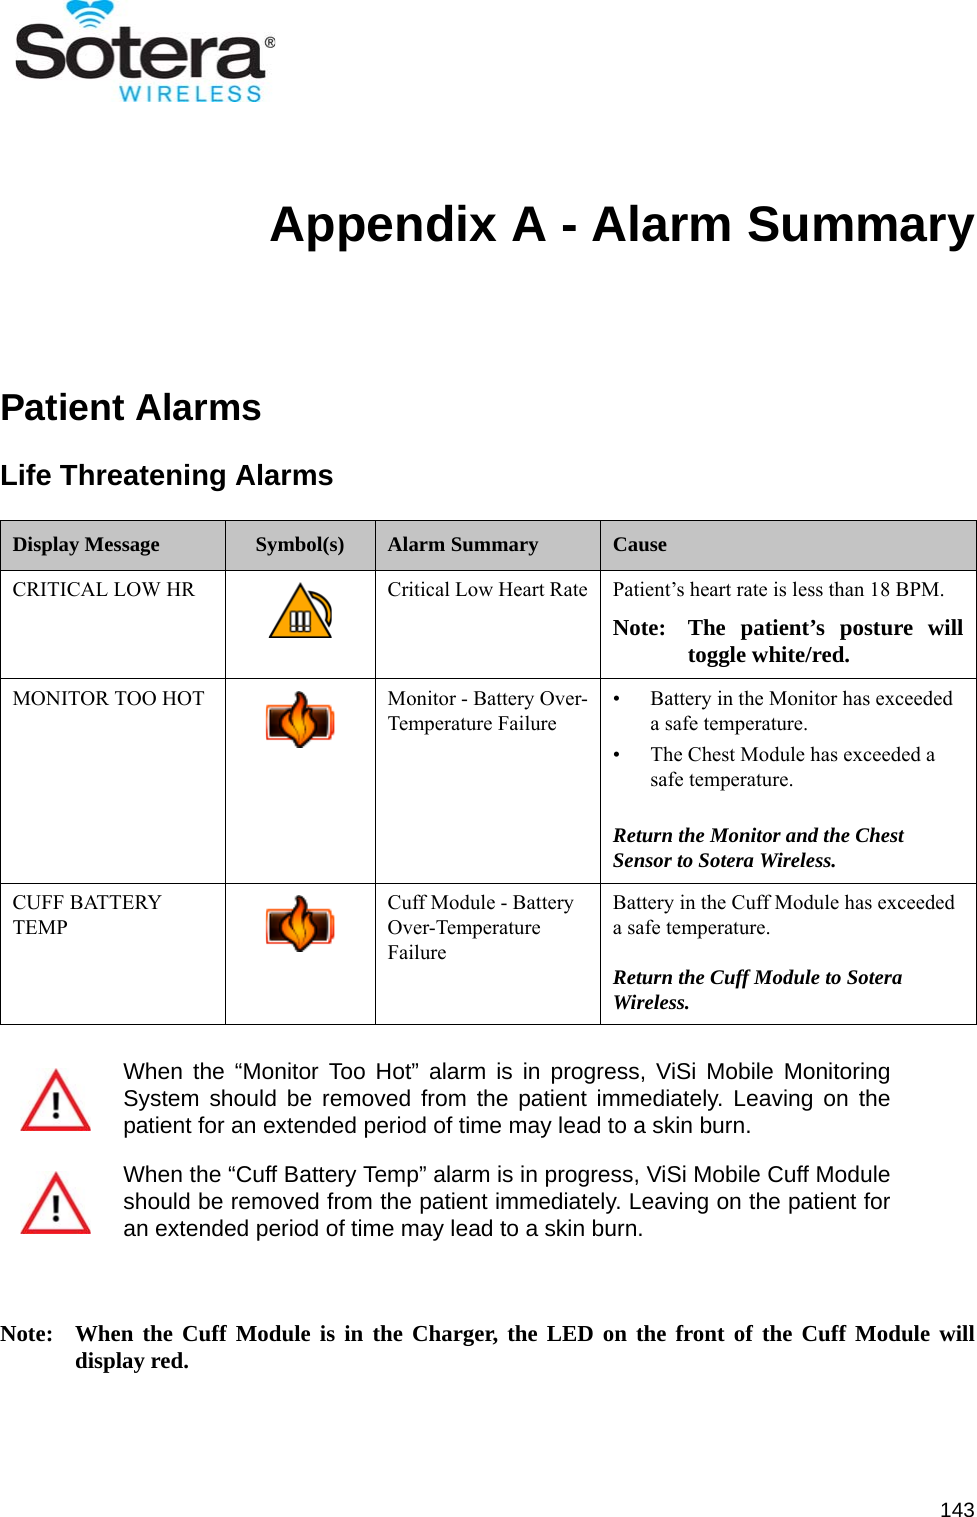 143Appendix A - Alarm SummaryPatient AlarmsLife Threatening AlarmsNote: When the Cuff Module is in the Charger, the LED on the front of the Cuff Module willdisplay red.Display Message Symbol(s) Alarm Summary CauseCRITICAL LOW HR Critical Low Heart Rate Patient’s heart rate is less than 18 BPM.Note: The patient’s posture willtoggle white/red.MONITOR TOO HOT Monitor - Battery Over-Temperature Failure• Battery in the Monitor has exceeded a safe temperature.• The Chest Module has exceeded a safe temperature.Return the Monitor and the Chest Sensor to Sotera Wireless.CUFF BATTERY TEMPCuff Module - Battery Over-Temperature FailureBattery in the Cuff Module has exceeded a safe temperature.Return the Cuff Module to Sotera Wireless.When the “Monitor Too Hot” alarm is in progress, ViSi Mobile MonitoringSystem should be removed from the patient immediately. Leaving on thepatient for an extended period of time may lead to a skin burn.When the “Cuff Battery Temp” alarm is in progress, ViSi Mobile Cuff Moduleshould be removed from the patient immediately. Leaving on the patient foran extended period of time may lead to a skin burn.